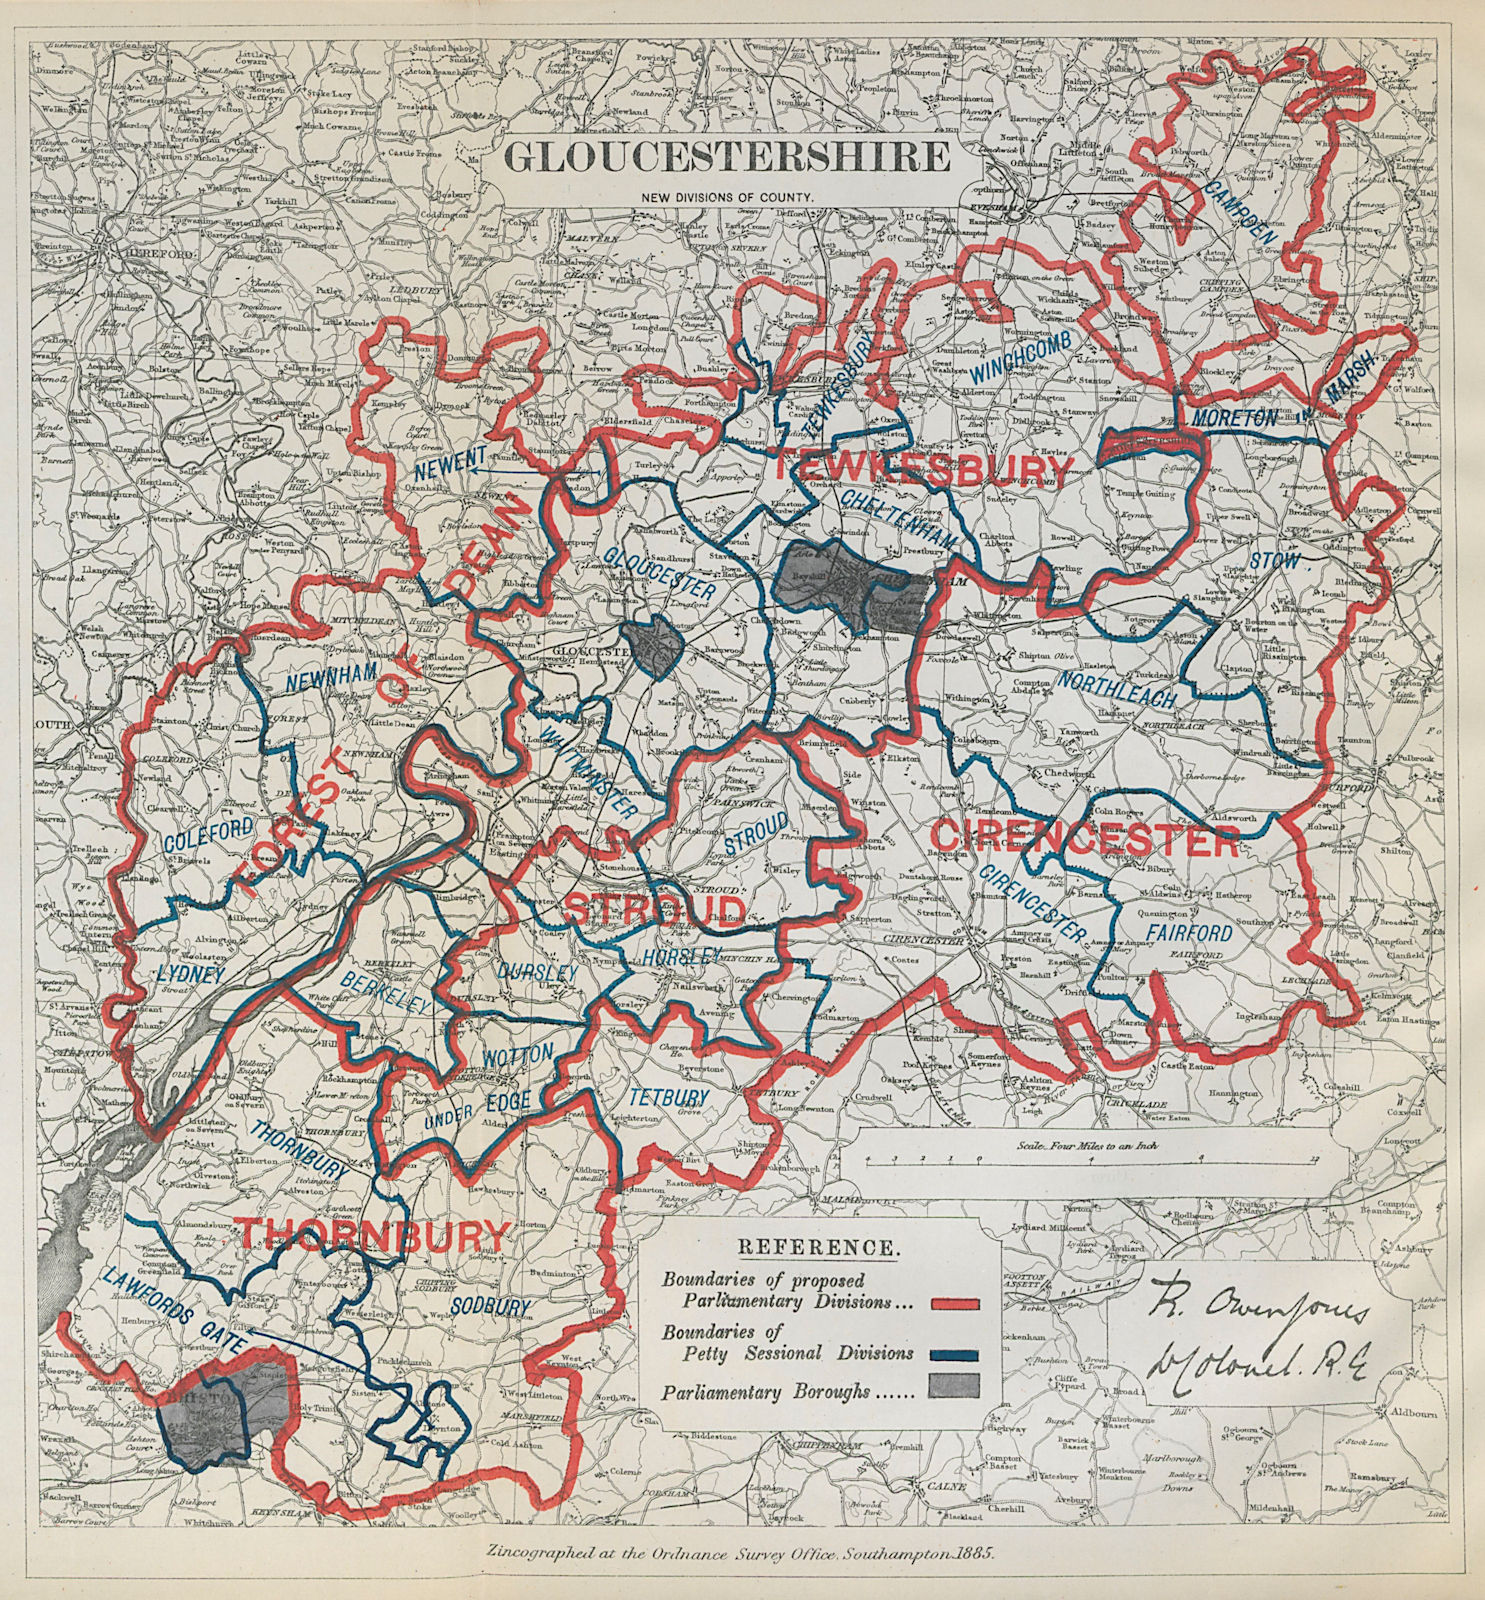 Associate Product Gloucestershire Parliamentary Divisions. Stroud. BOUNDARY COMMISSION 1885 map